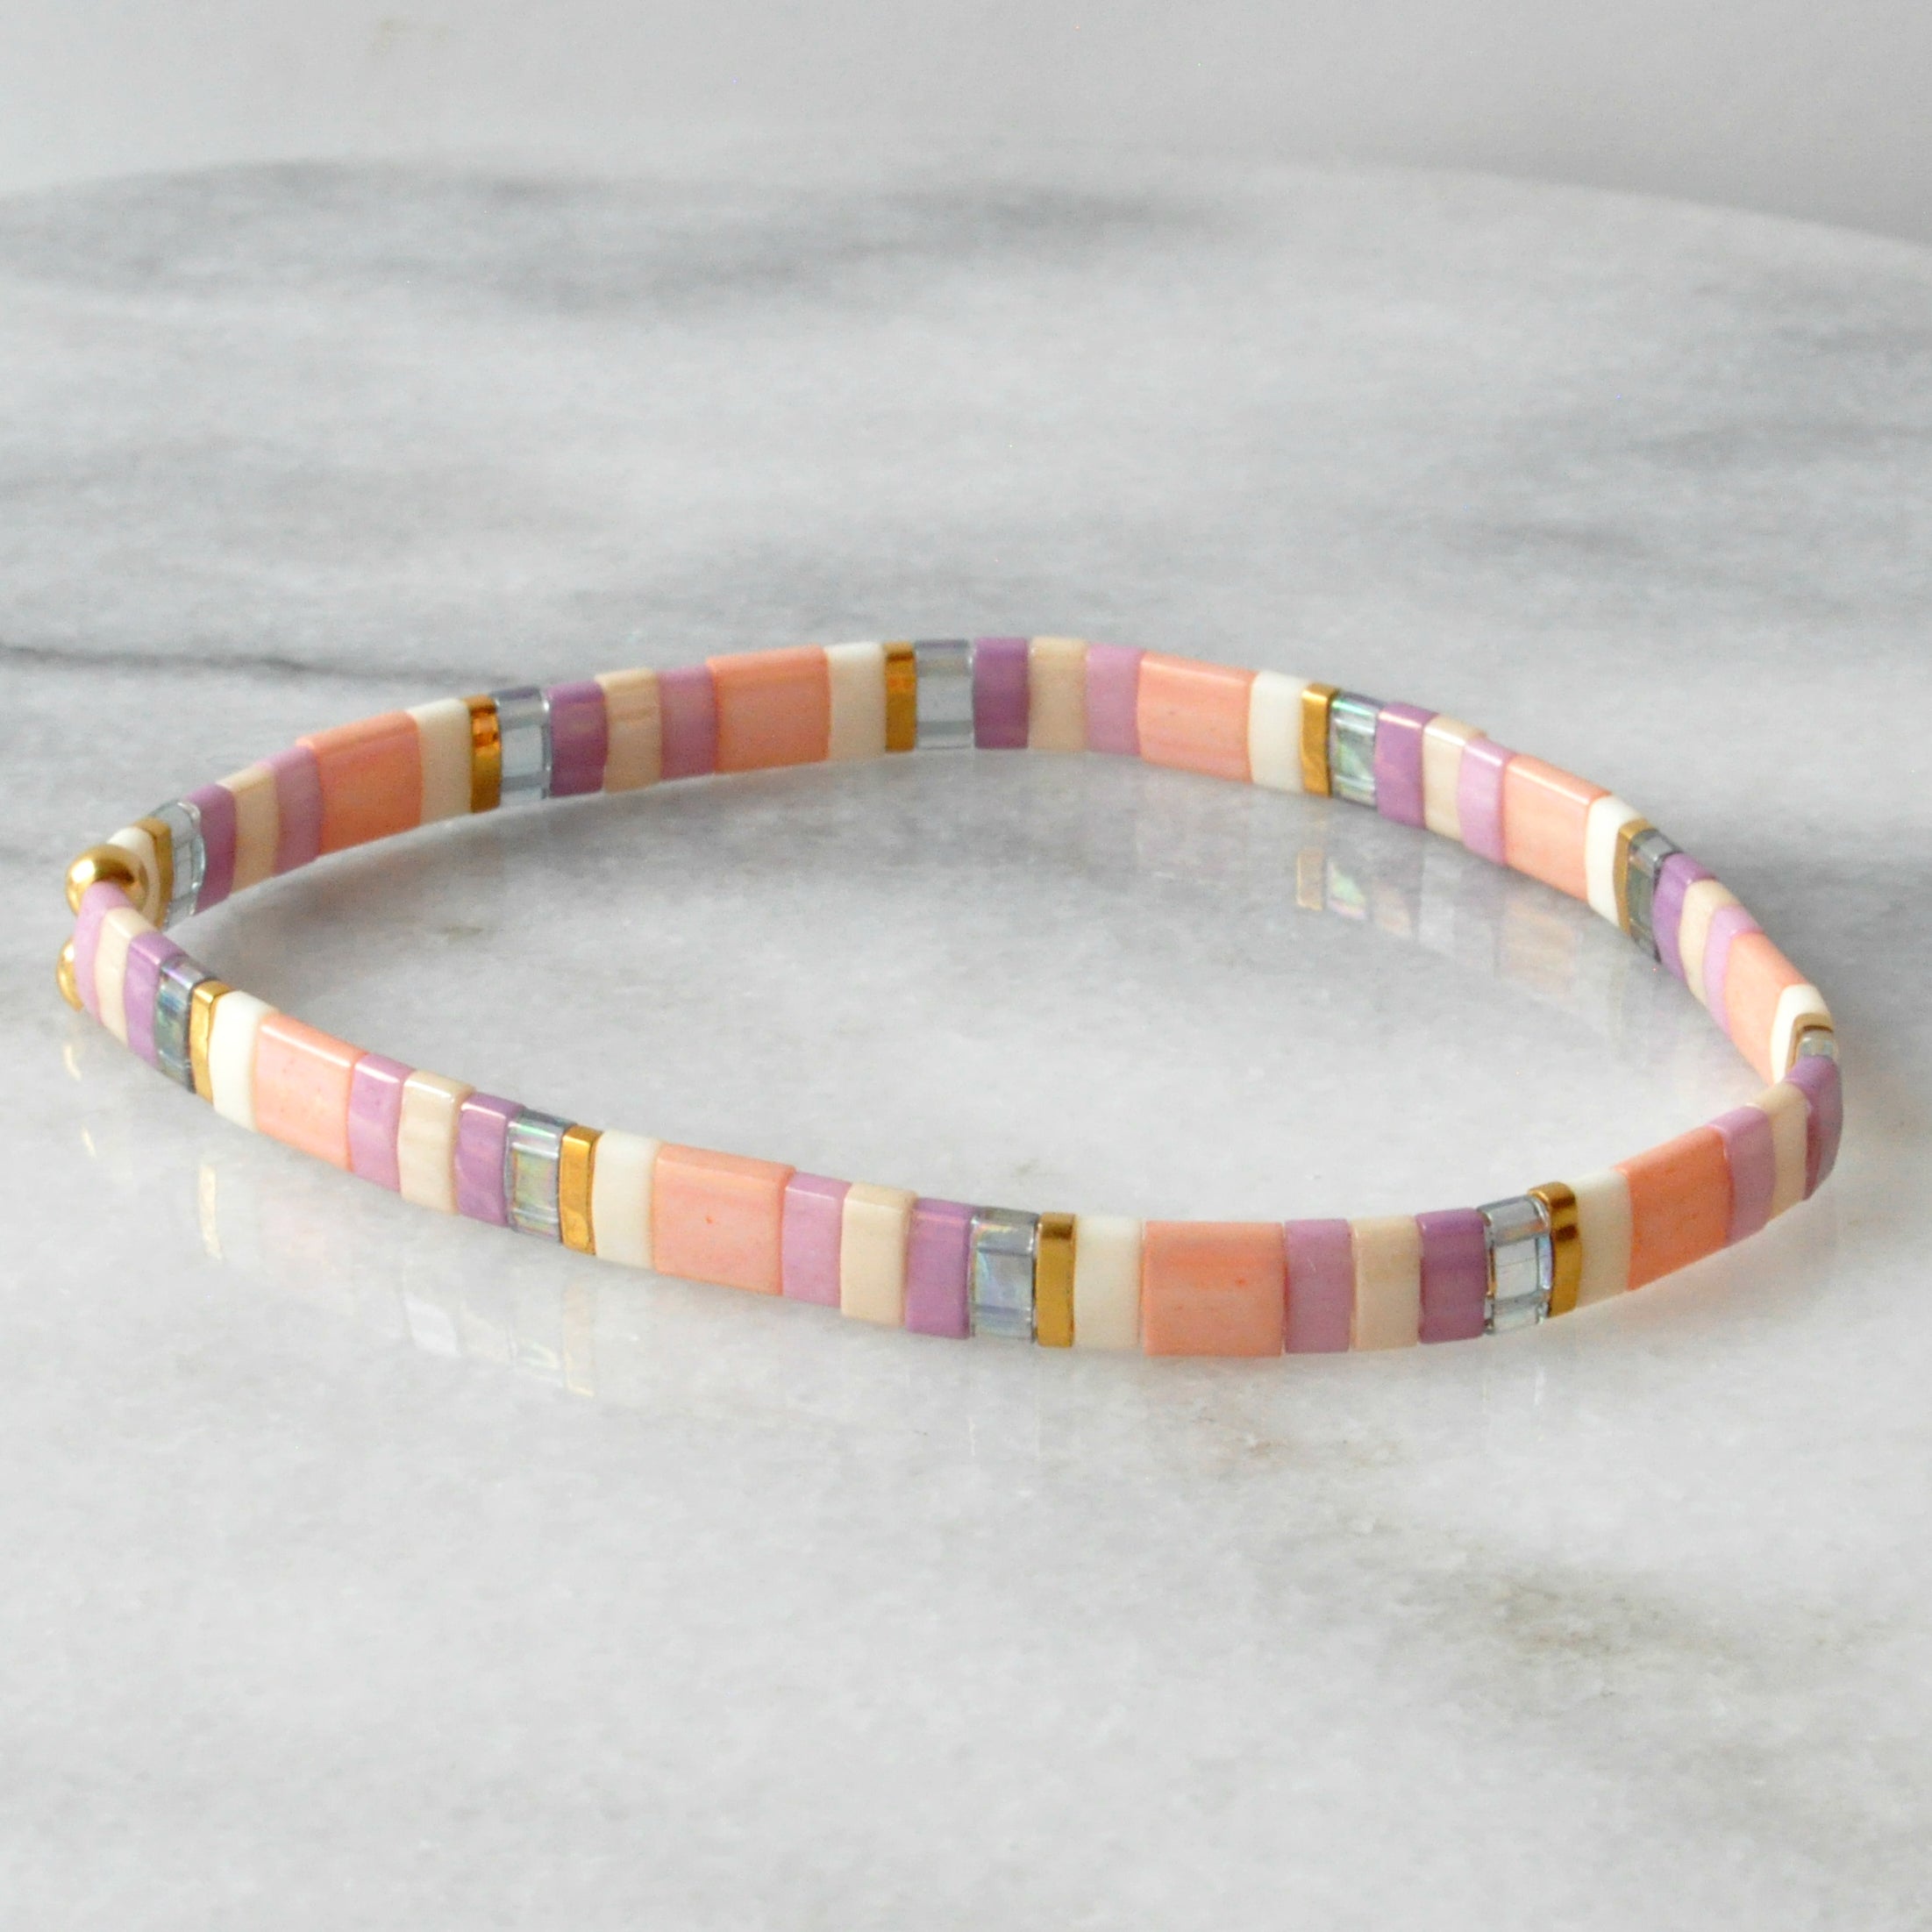 Libby & Smee stretch tile bracelet in Cotton Candy